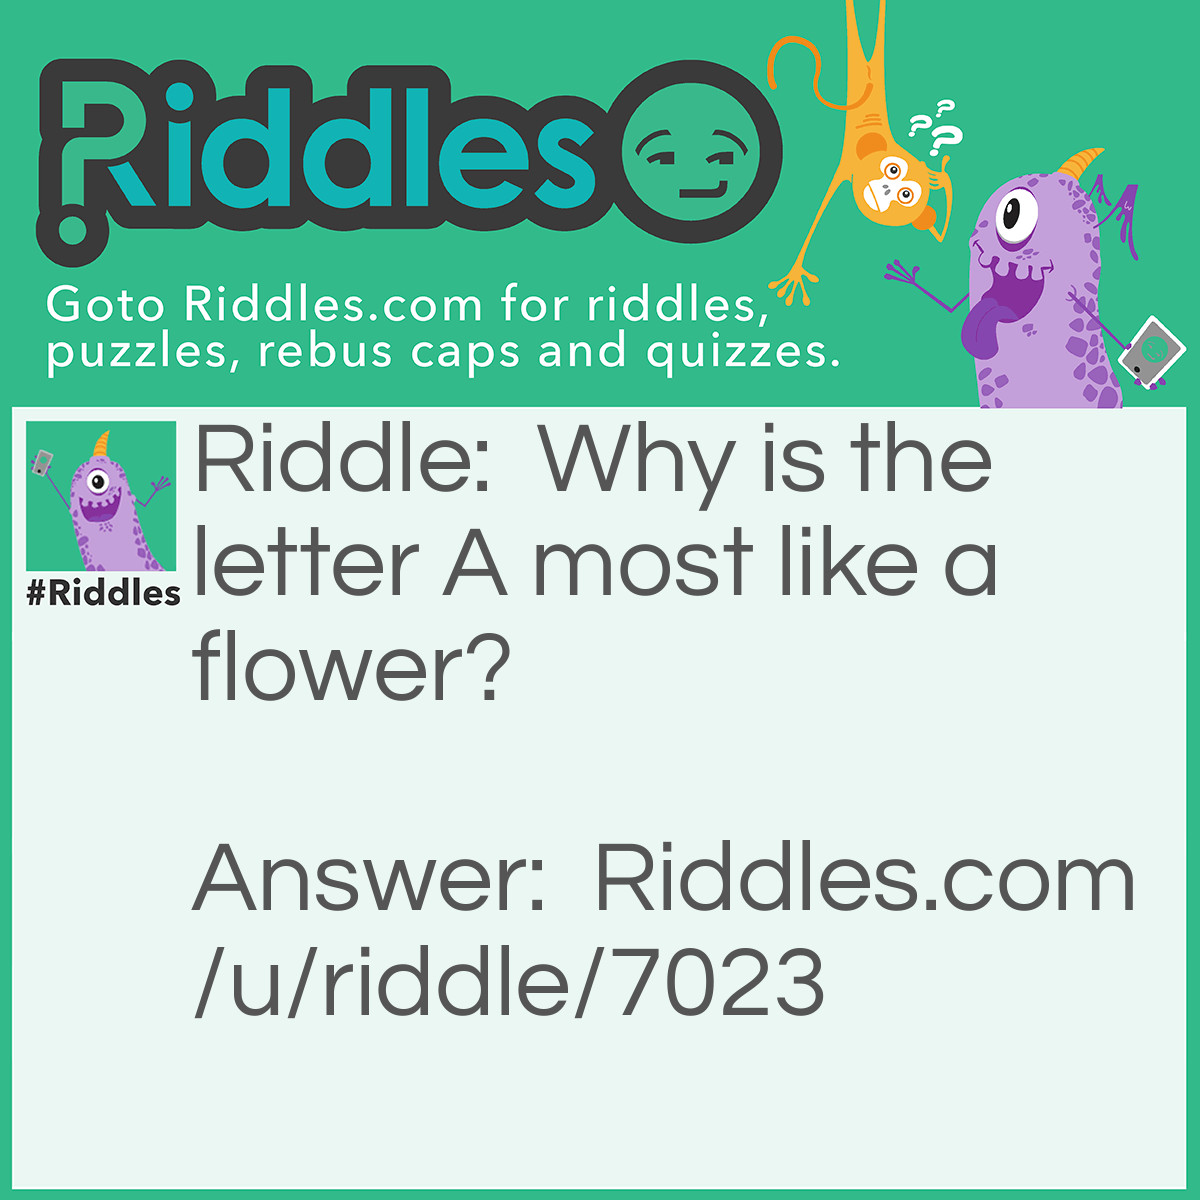 Riddle: Why is the letter A most like a flower? Answer: Because the 'B' is after it!